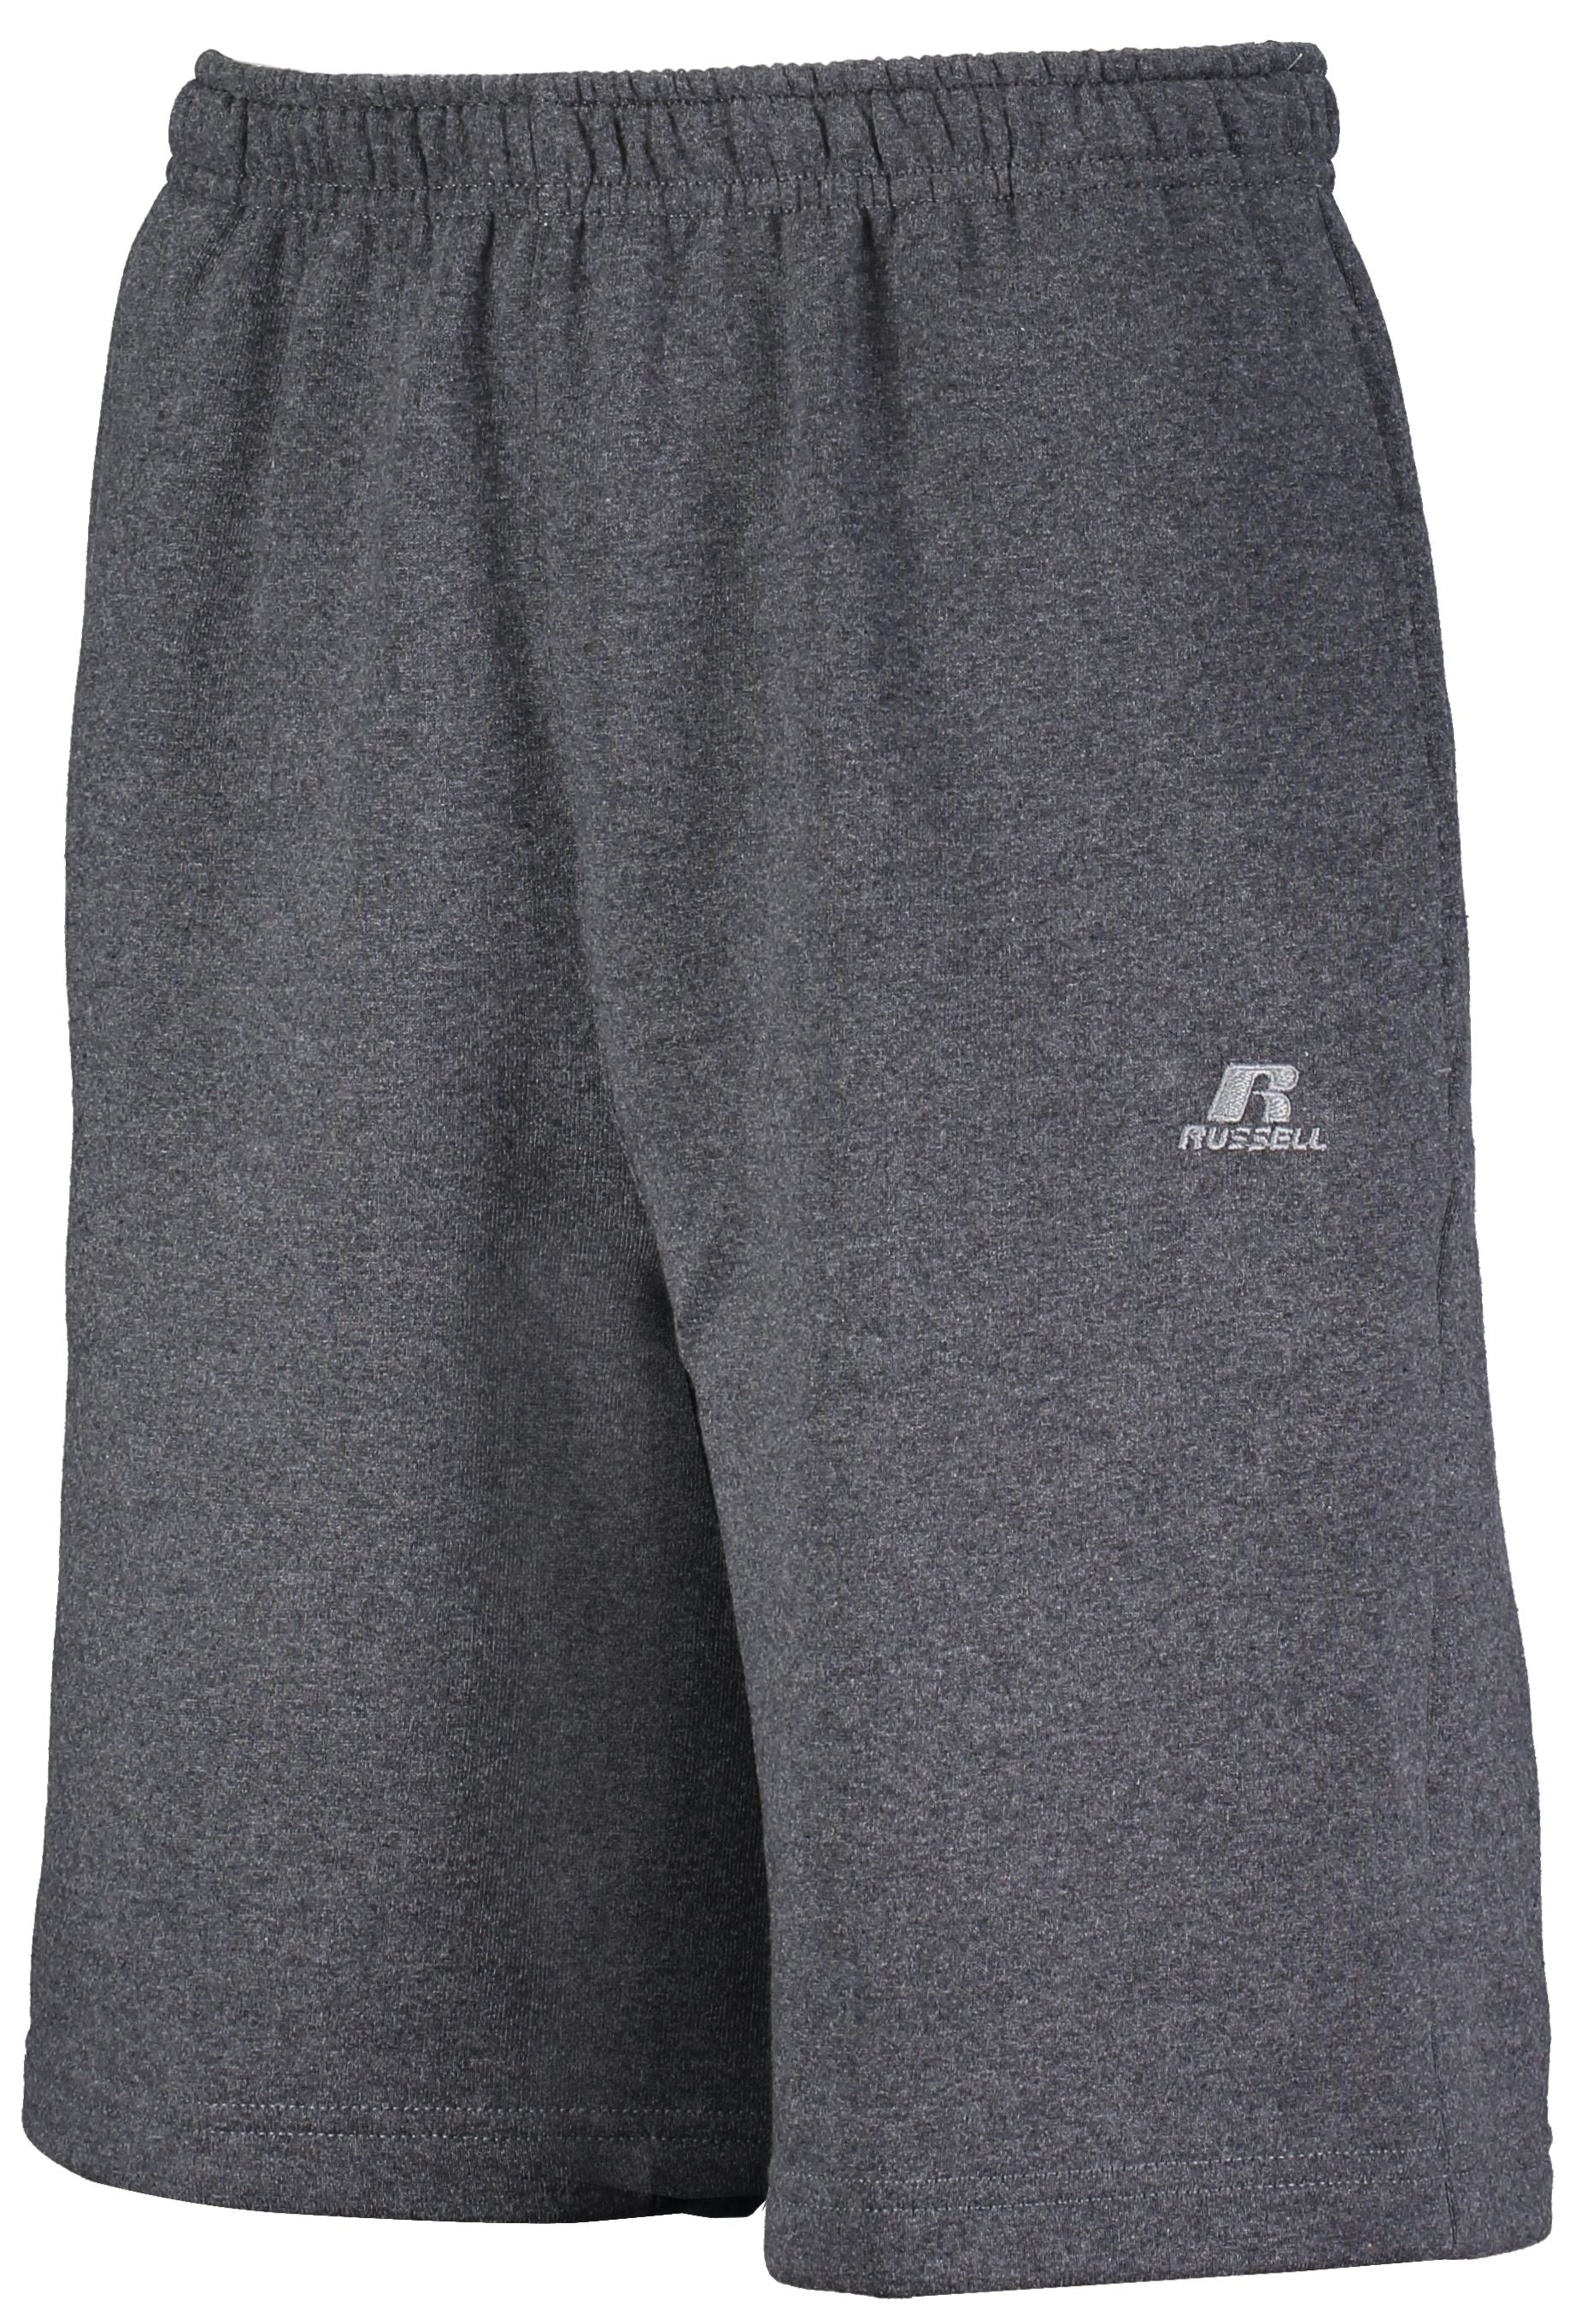 Russell Athletic Dri-Power Fleece Training Shorts With Pockets in Black Heather  -Part of the Adult, Adult-Shorts, Russell-Athletic-Products product lines at KanaleyCreations.com